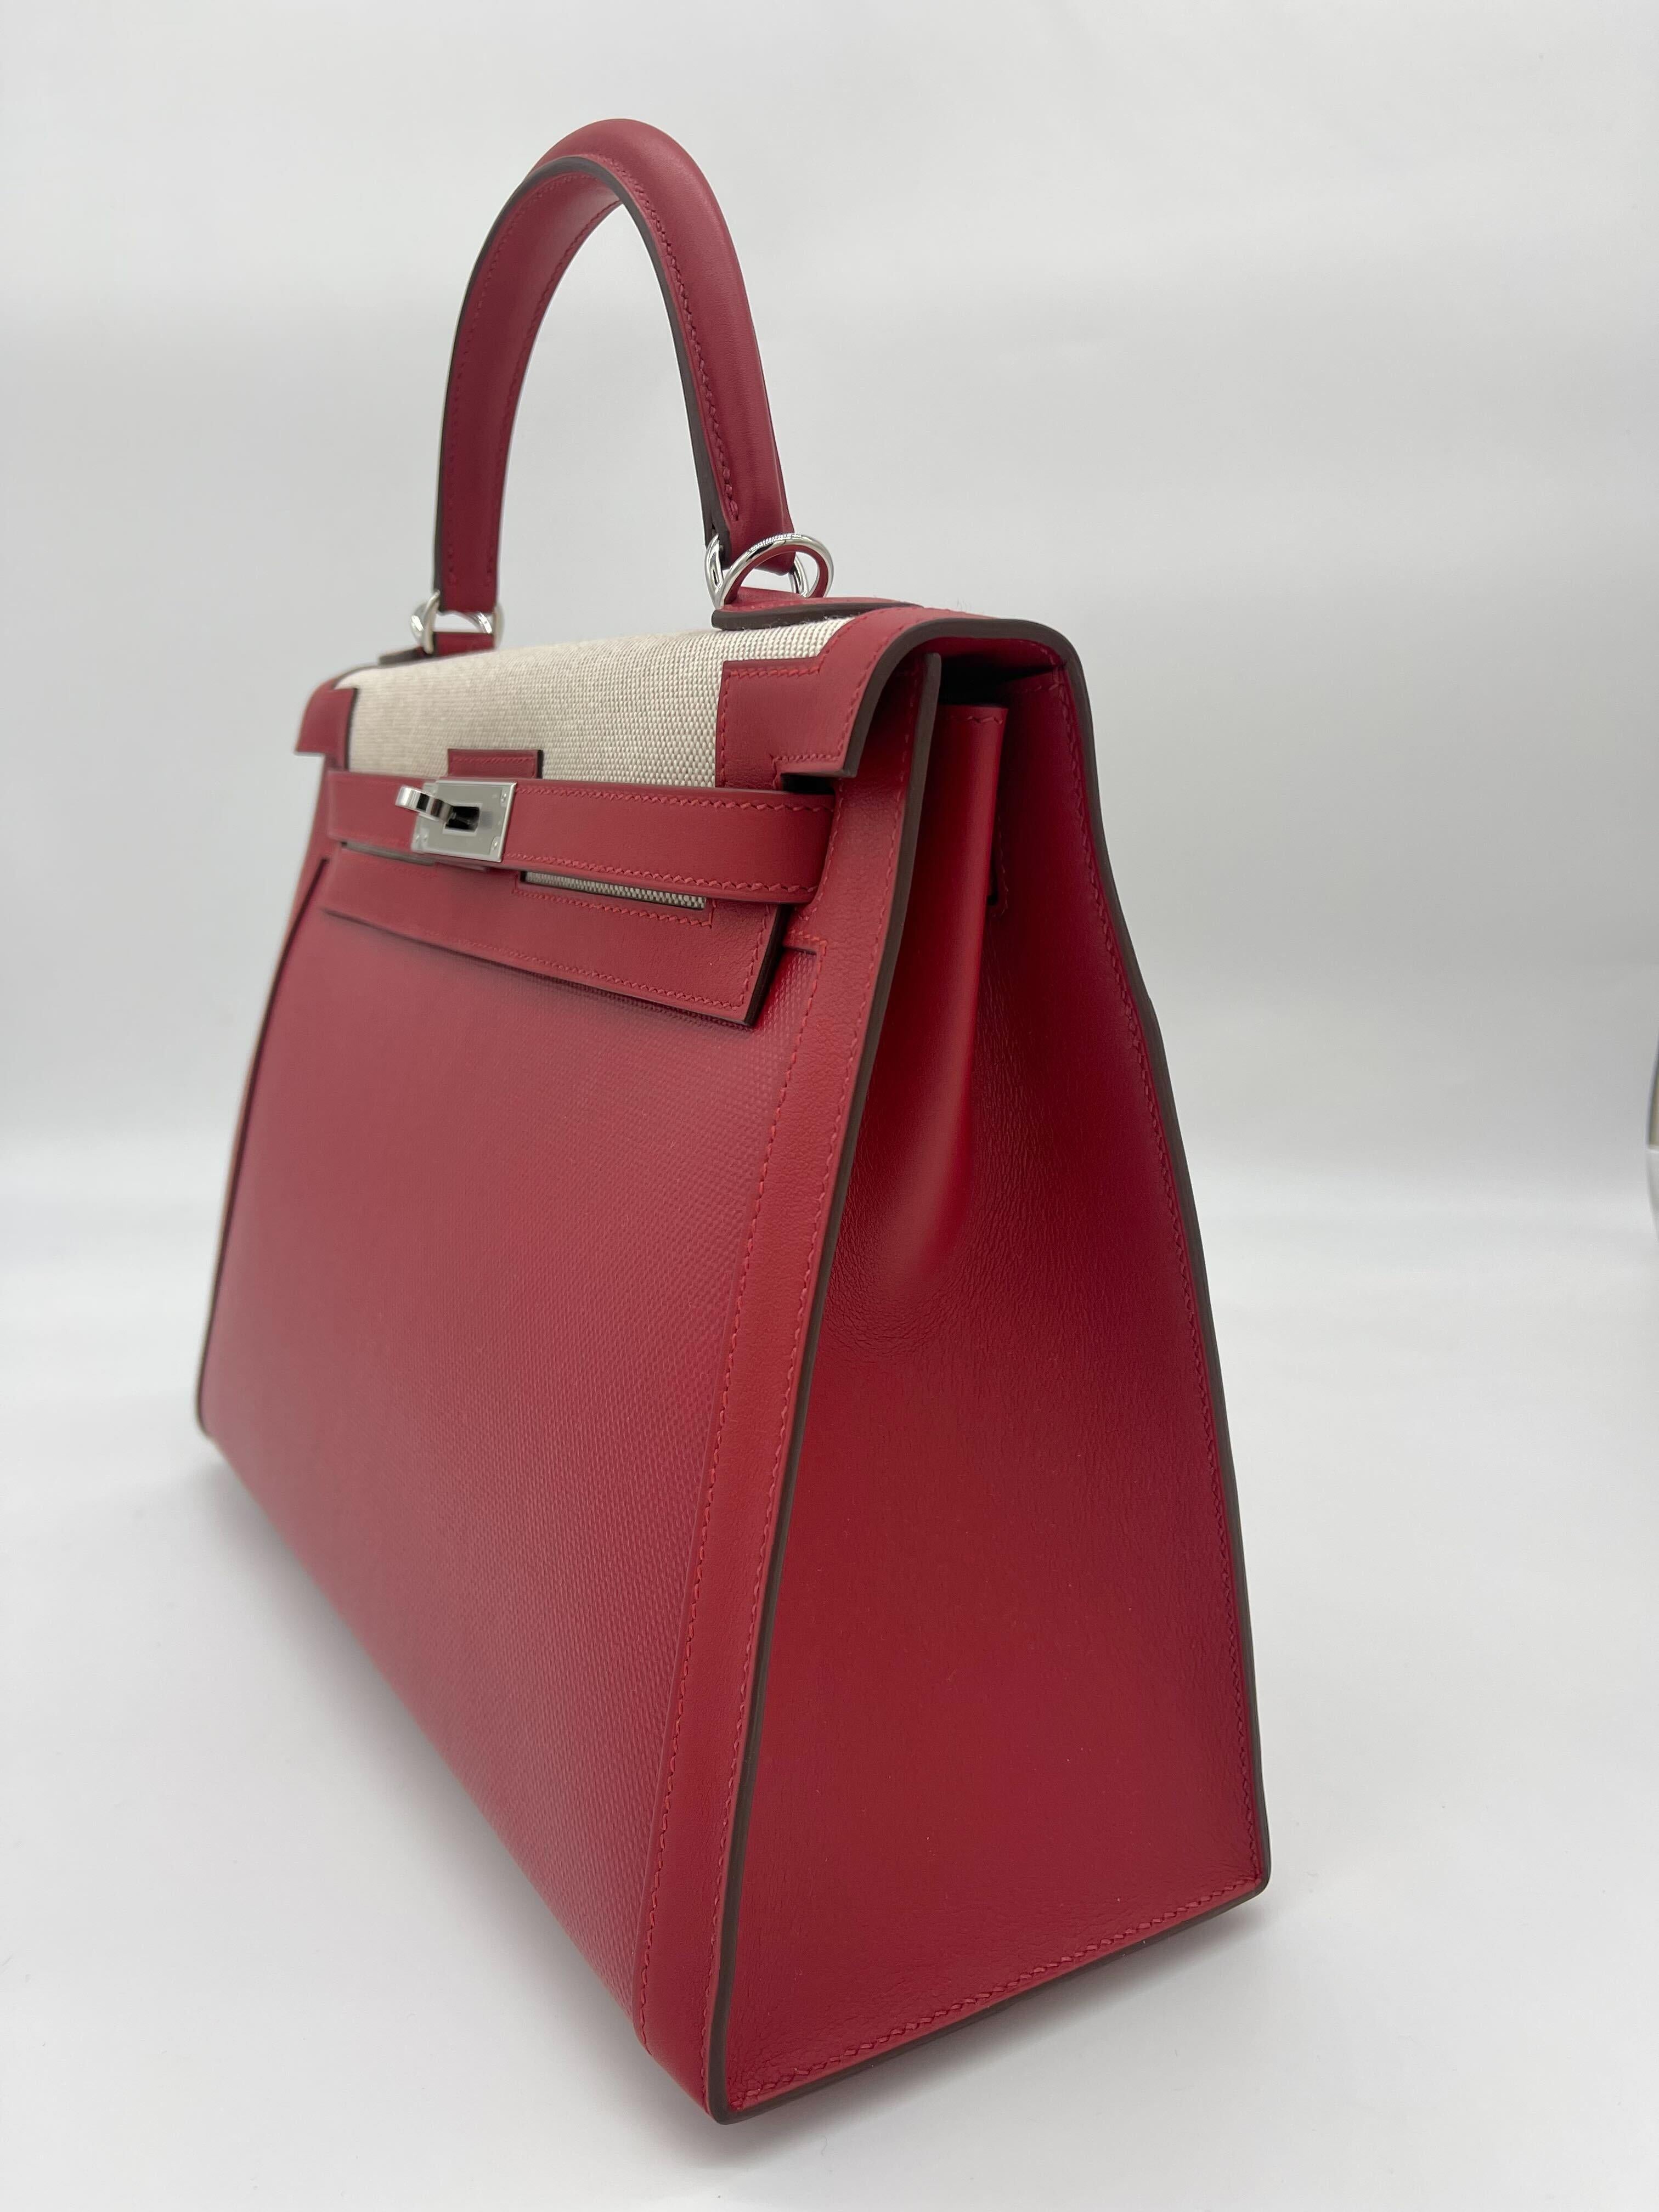 Hermes Kelly 32 Sellier Rouge Piment Swift and Toile Berline Palladium Hardware 1